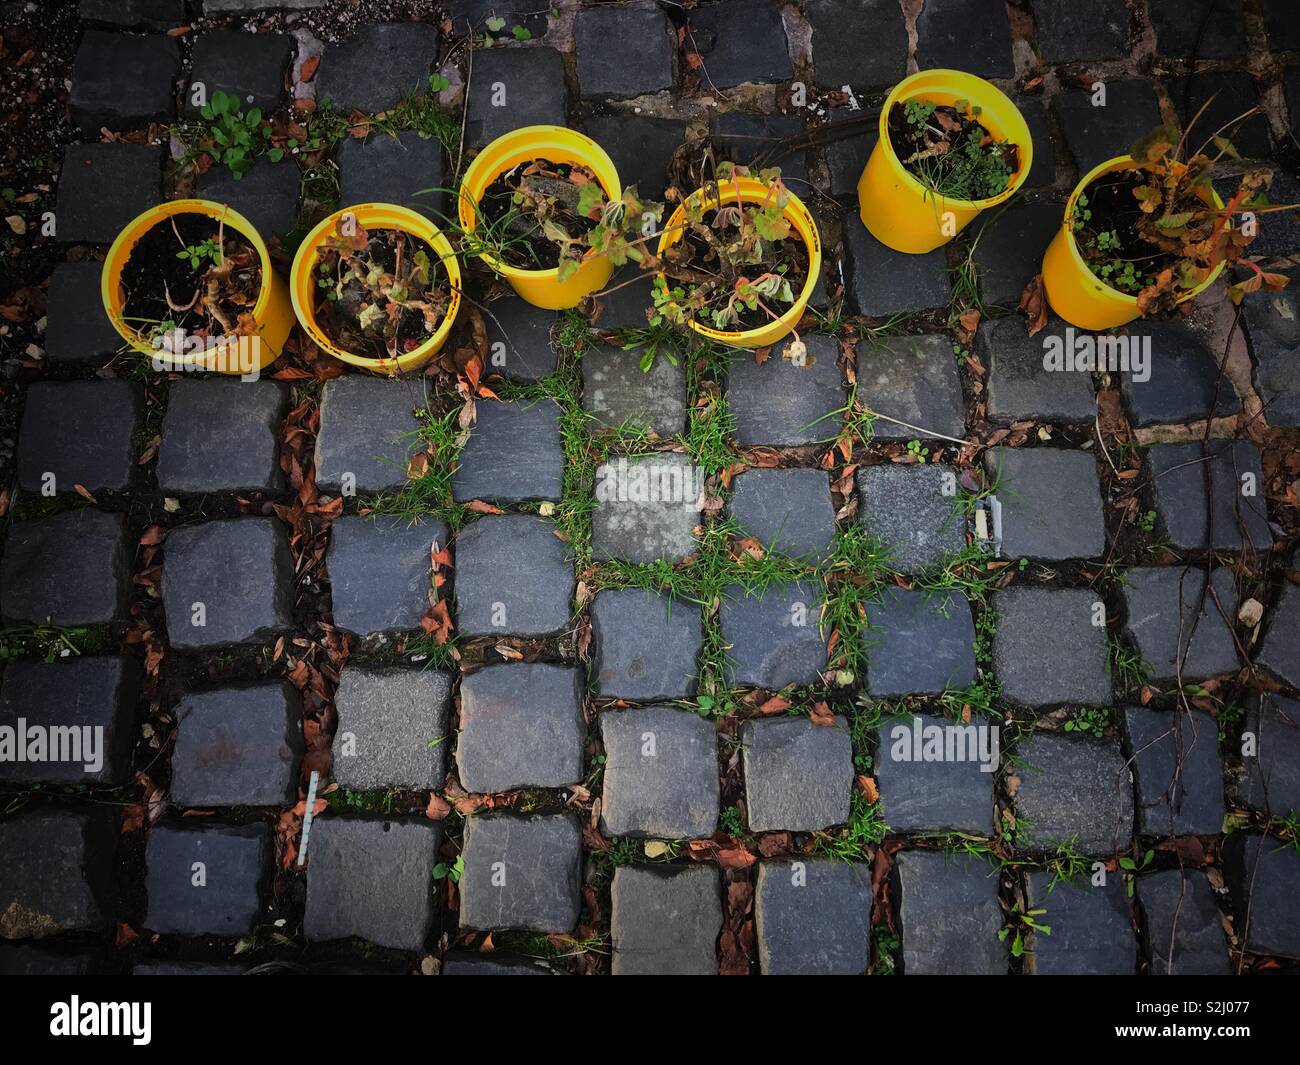 Yellow flower pots in a row on grey cobblestones. Stock Photo